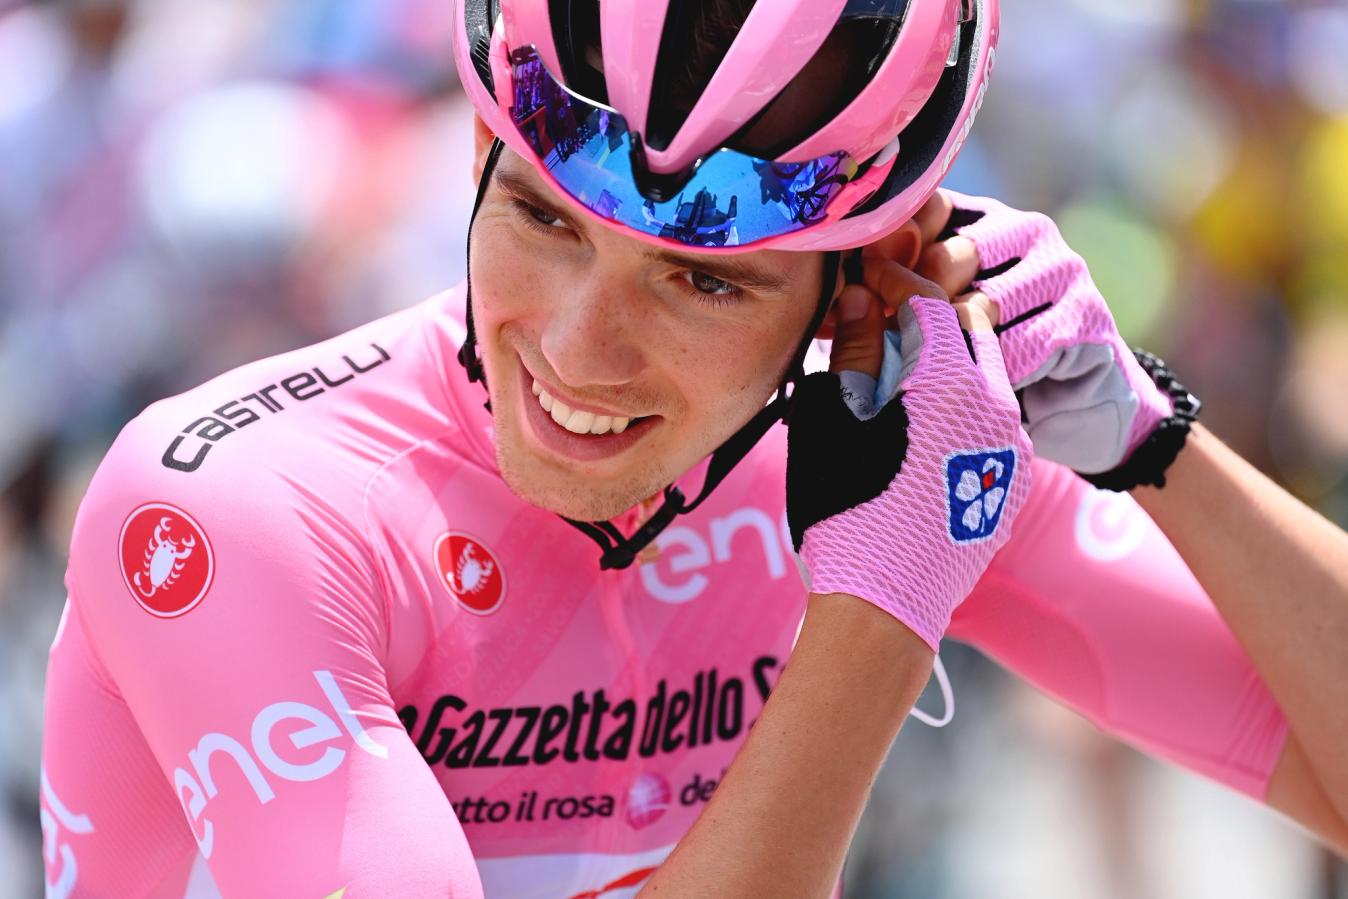 Attila Valter is part of an exclusive club of riders who have worn the Giro's pink jersey